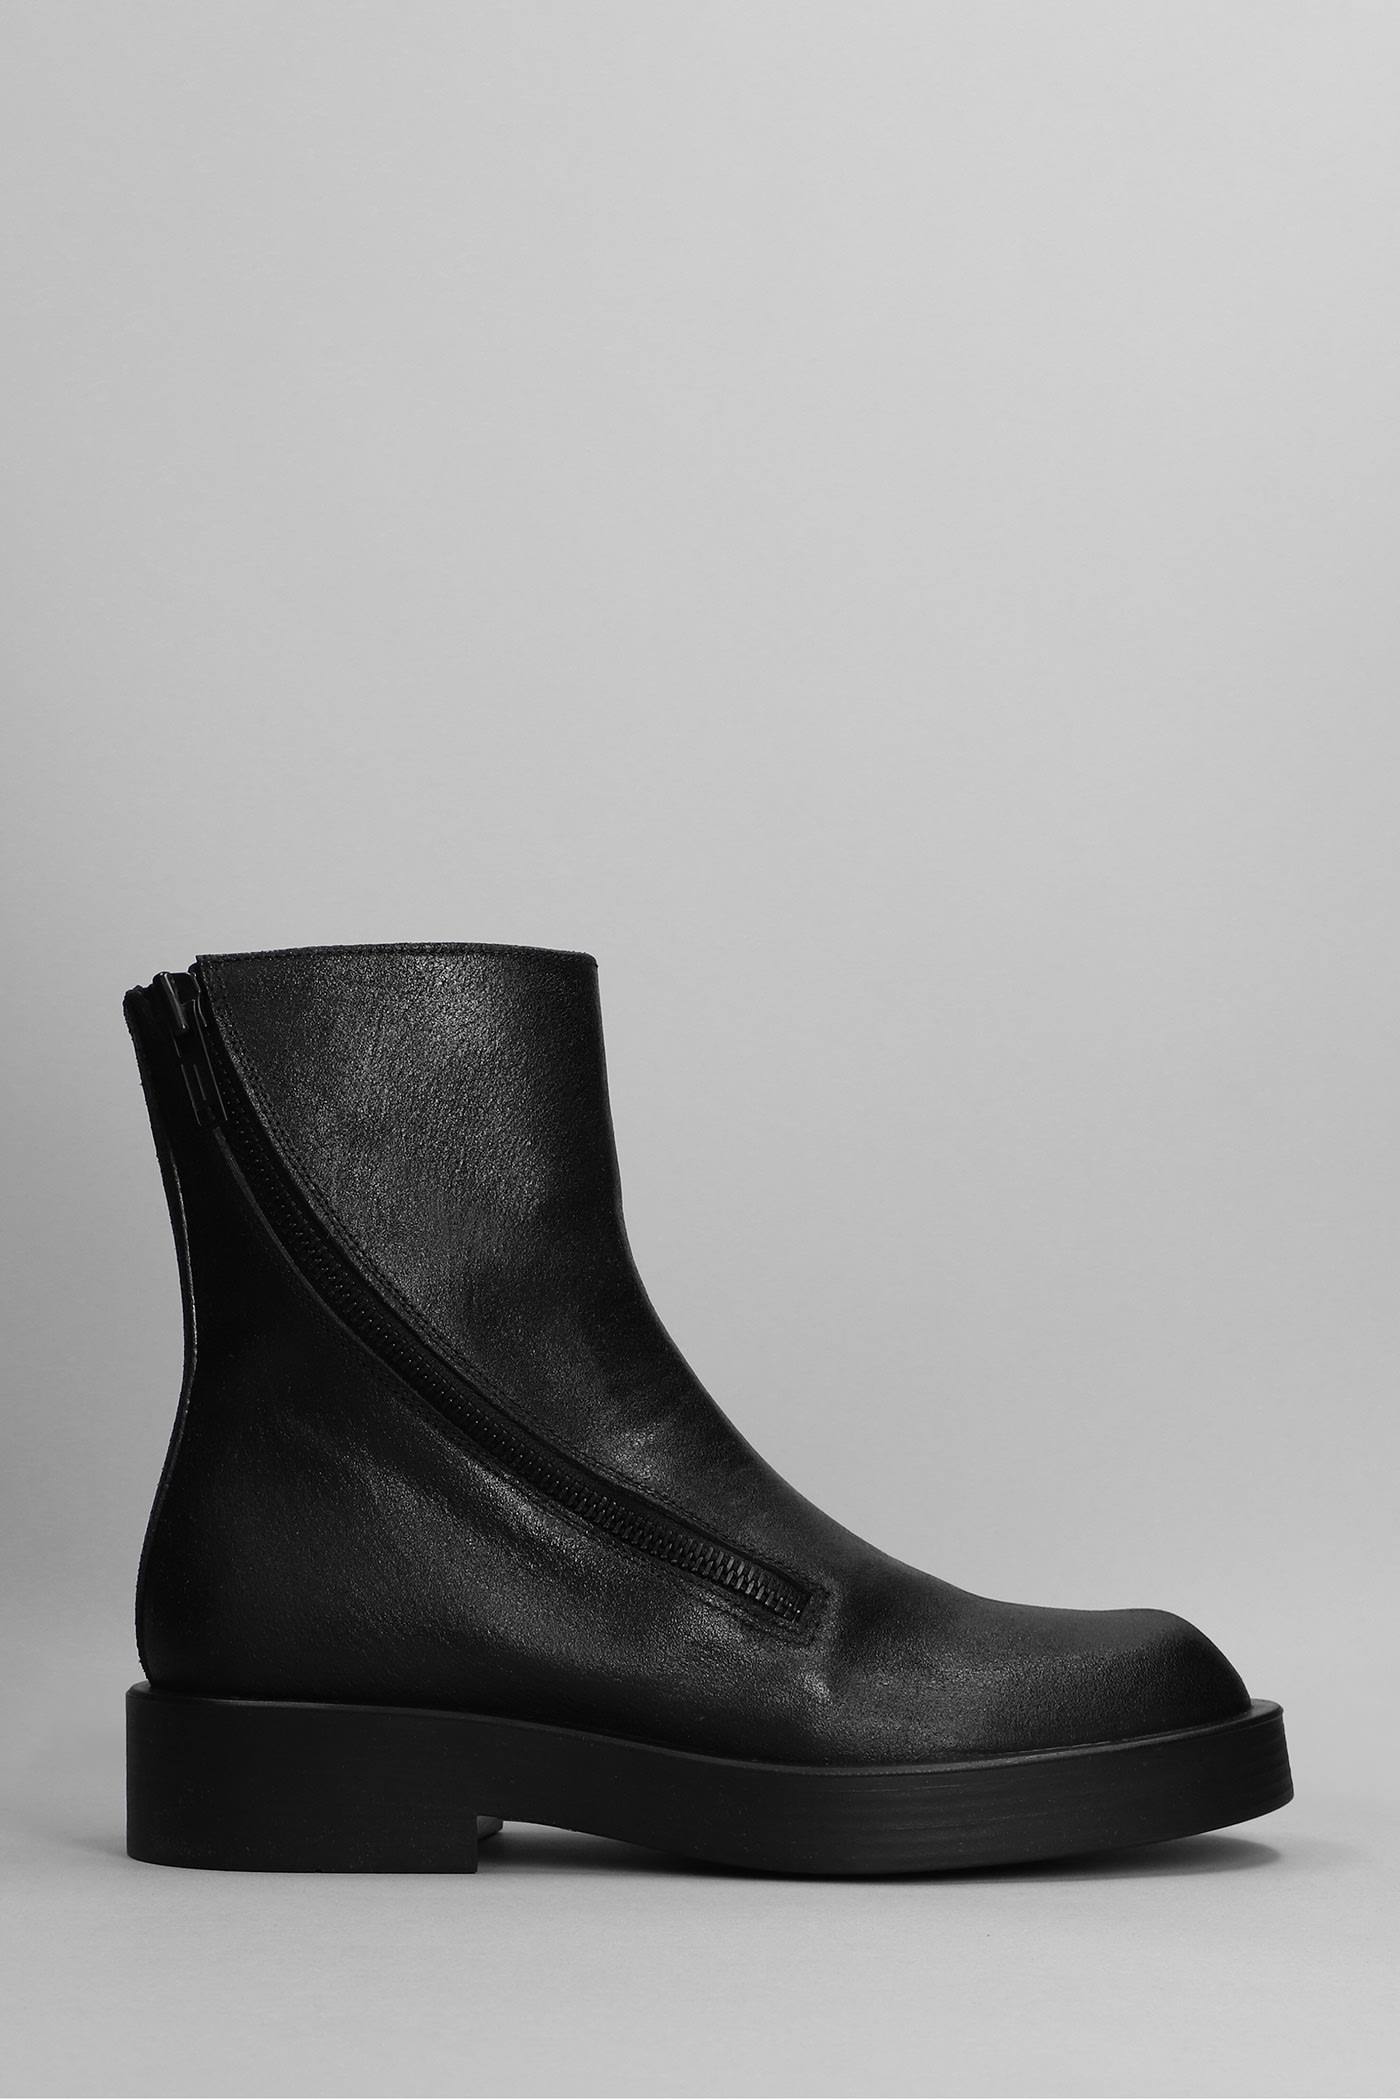 ANN DEMEULEMEESTER ERNEST BOOTS COMBAT BOOTS IN BLACK LEATHER